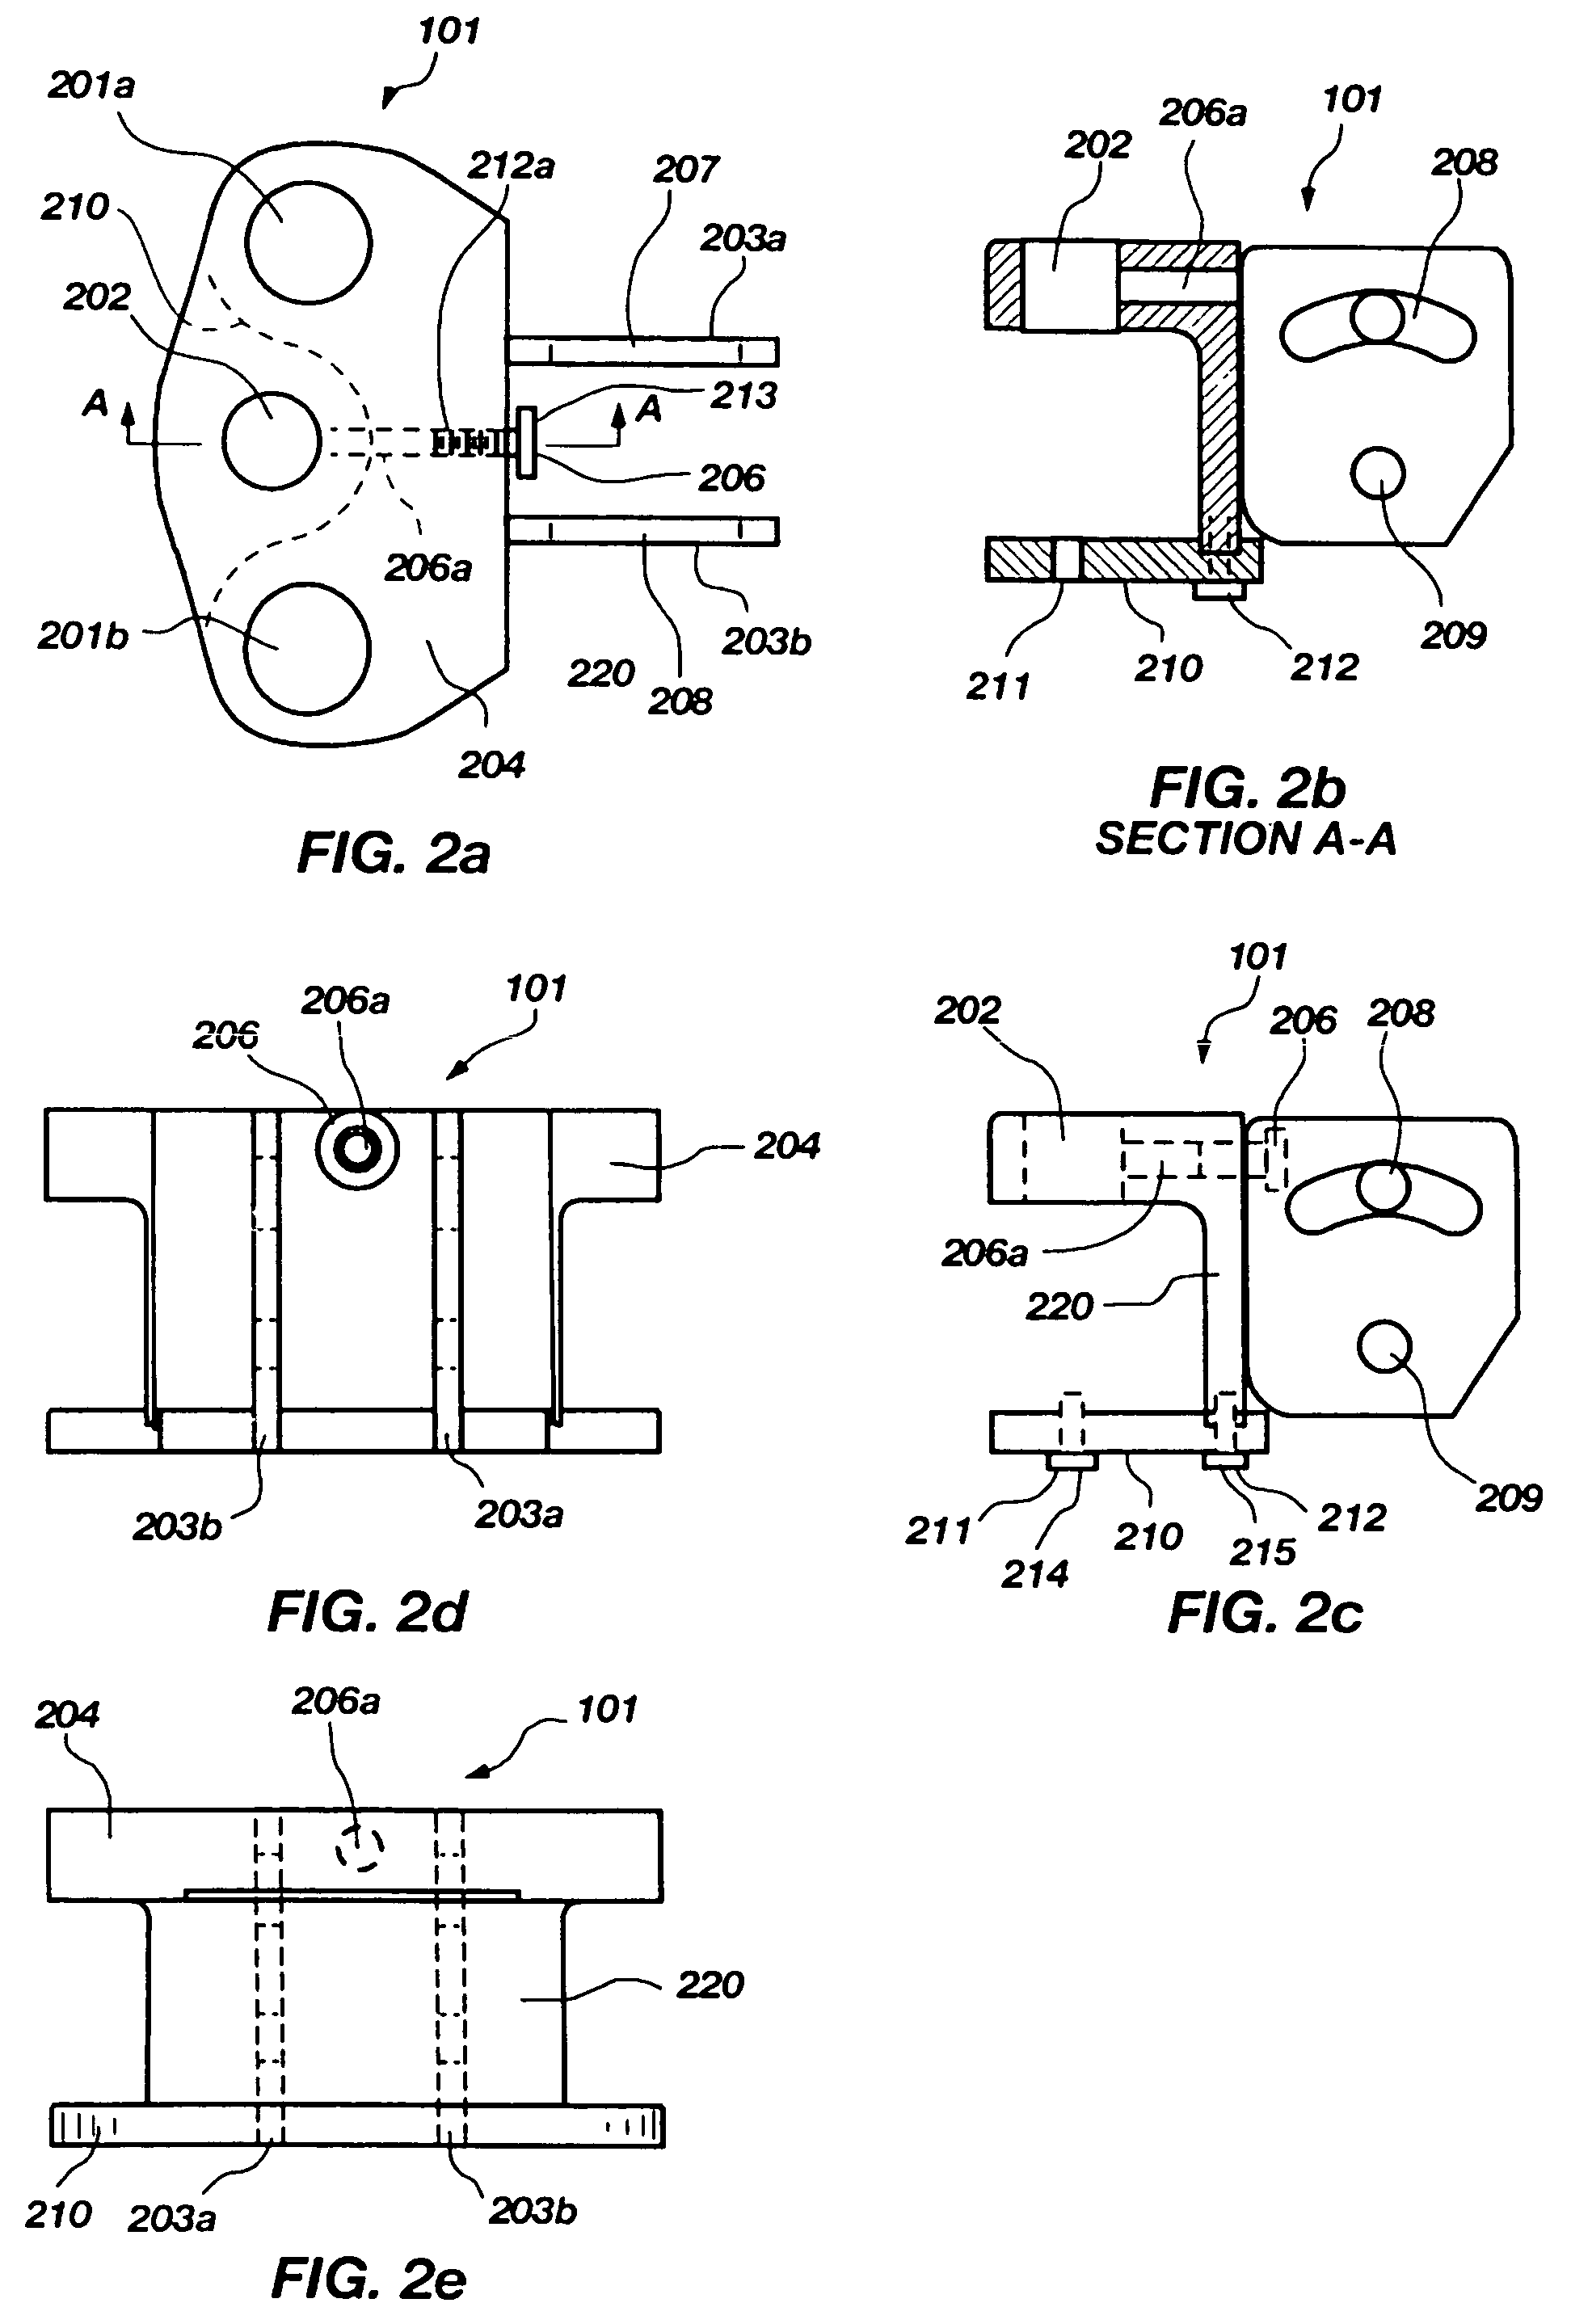 Load-leveling, weight-distributing hitch system